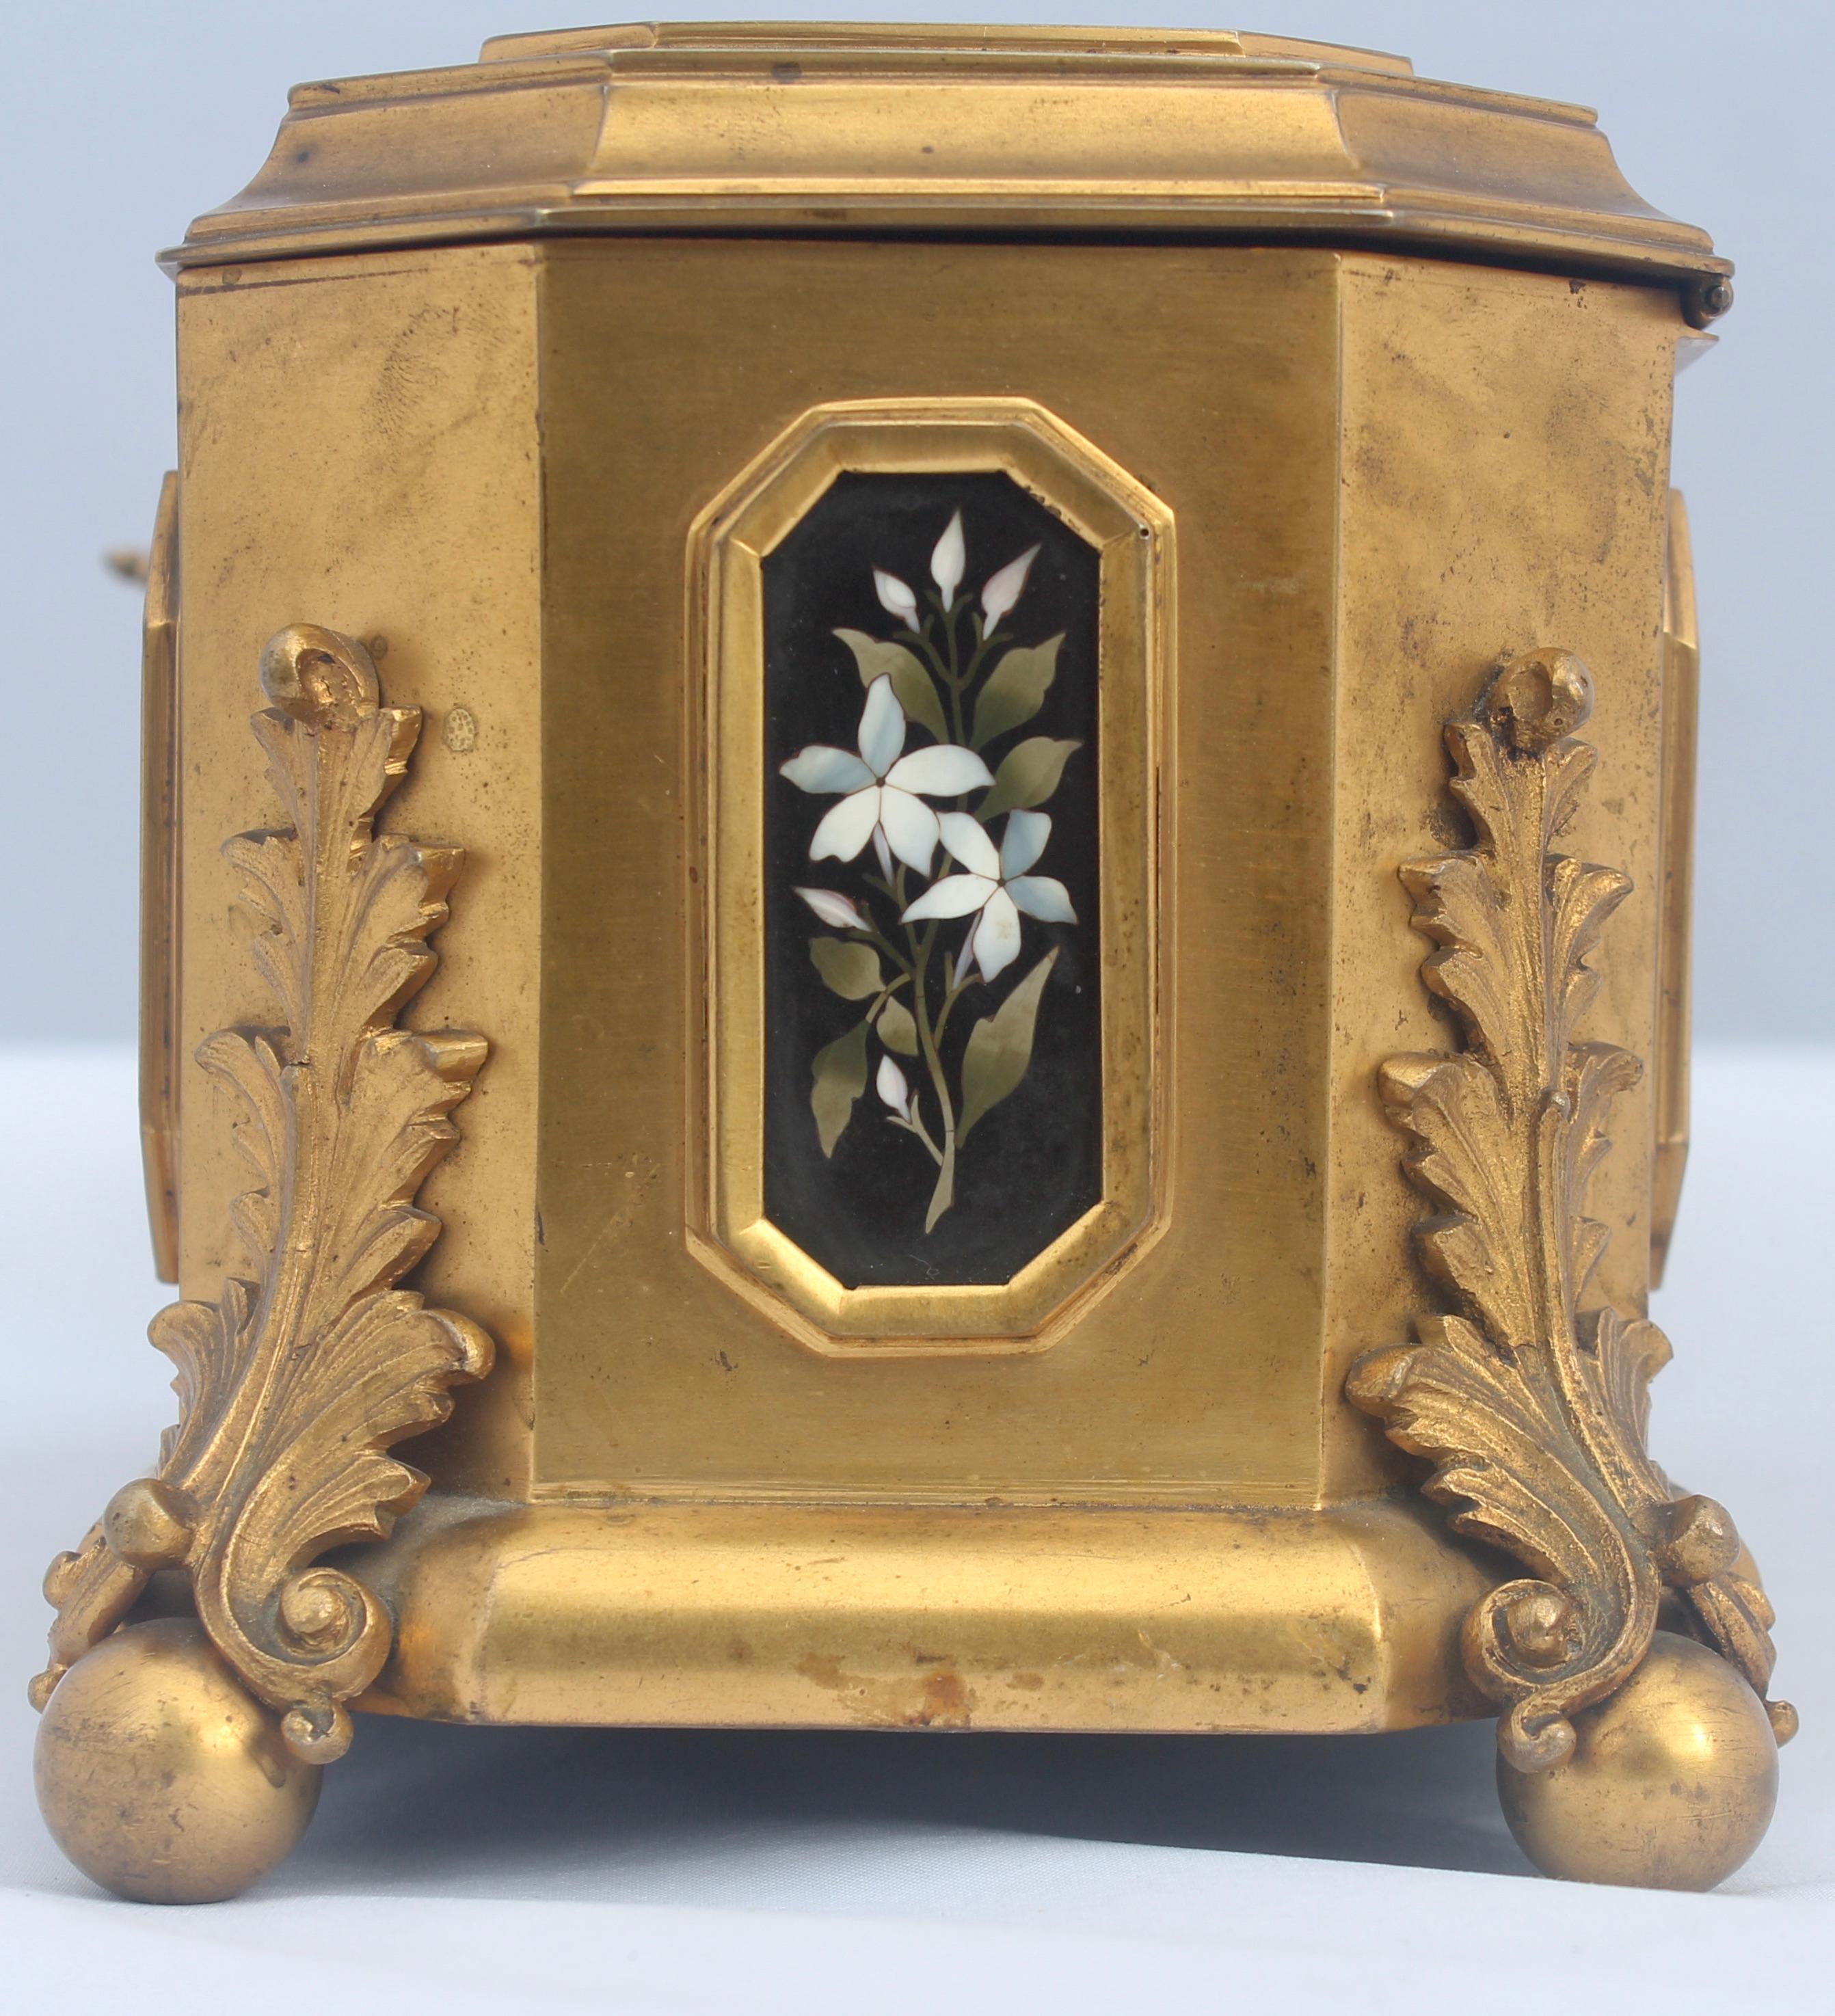 French 19th Century Gilt-Bronze and Pietra Dura Inset Jewelry Casket 11